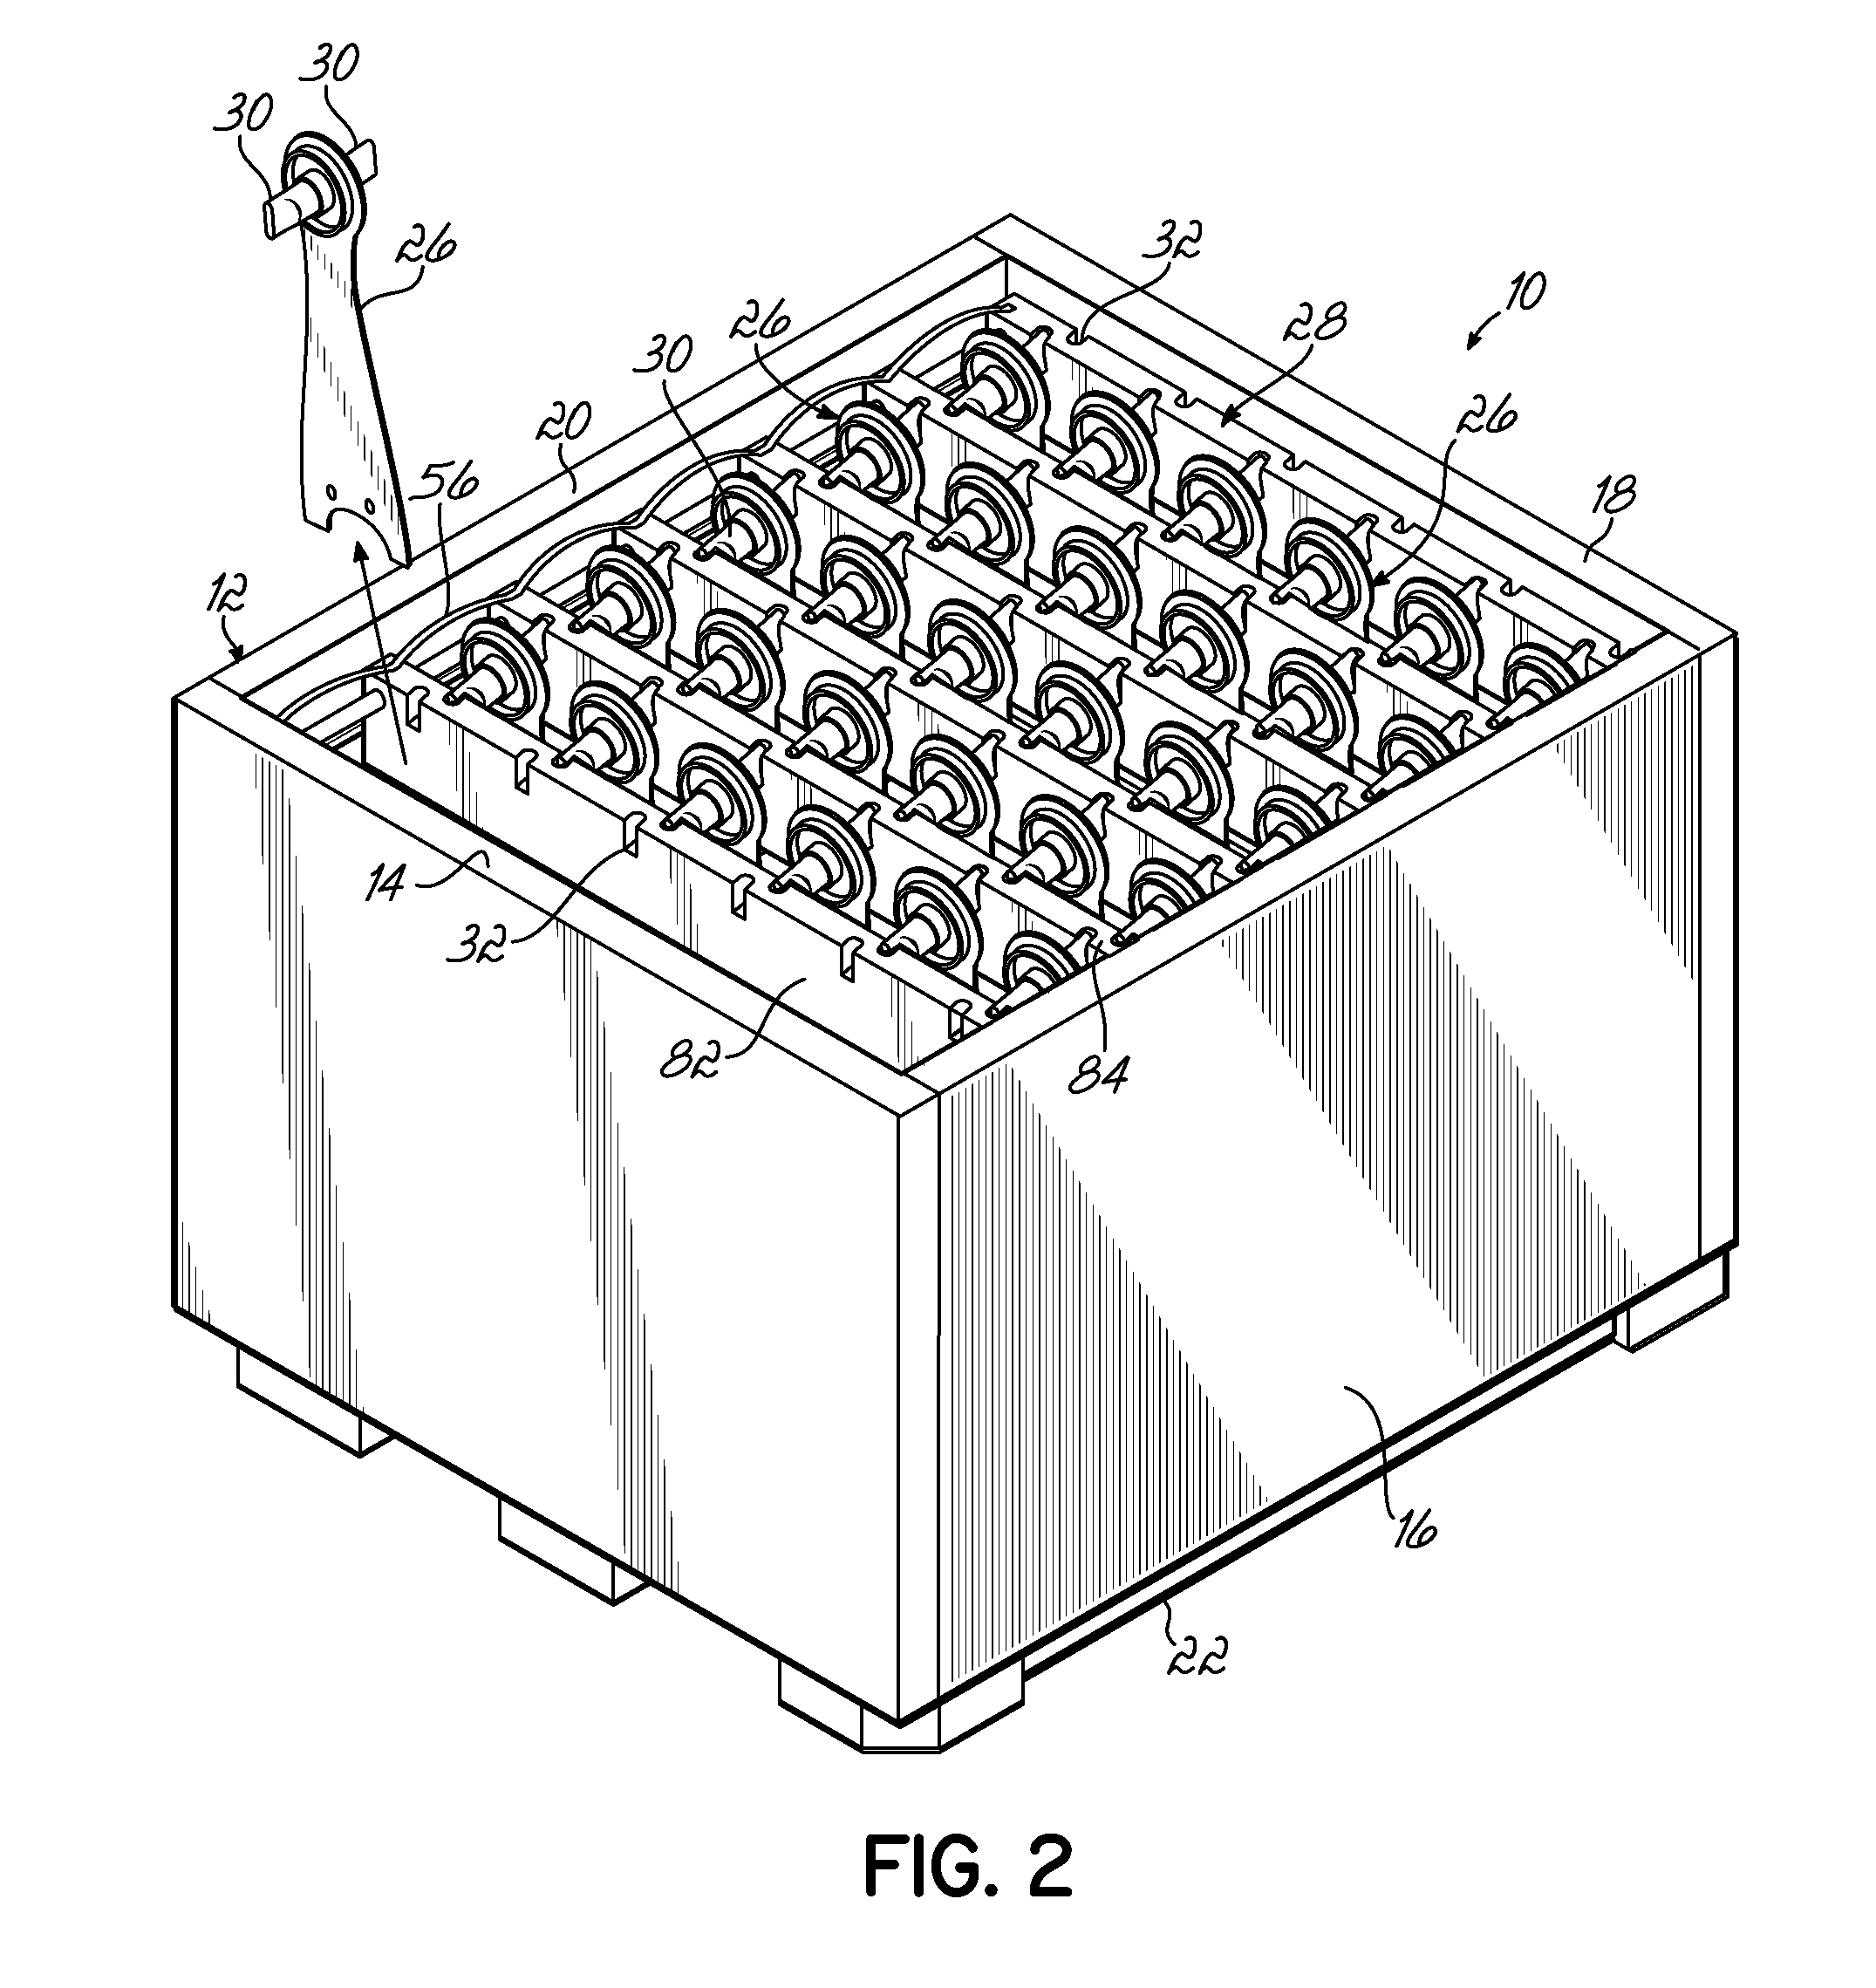 Method of Loading/Unloading Product From Container Having Movable Pouches